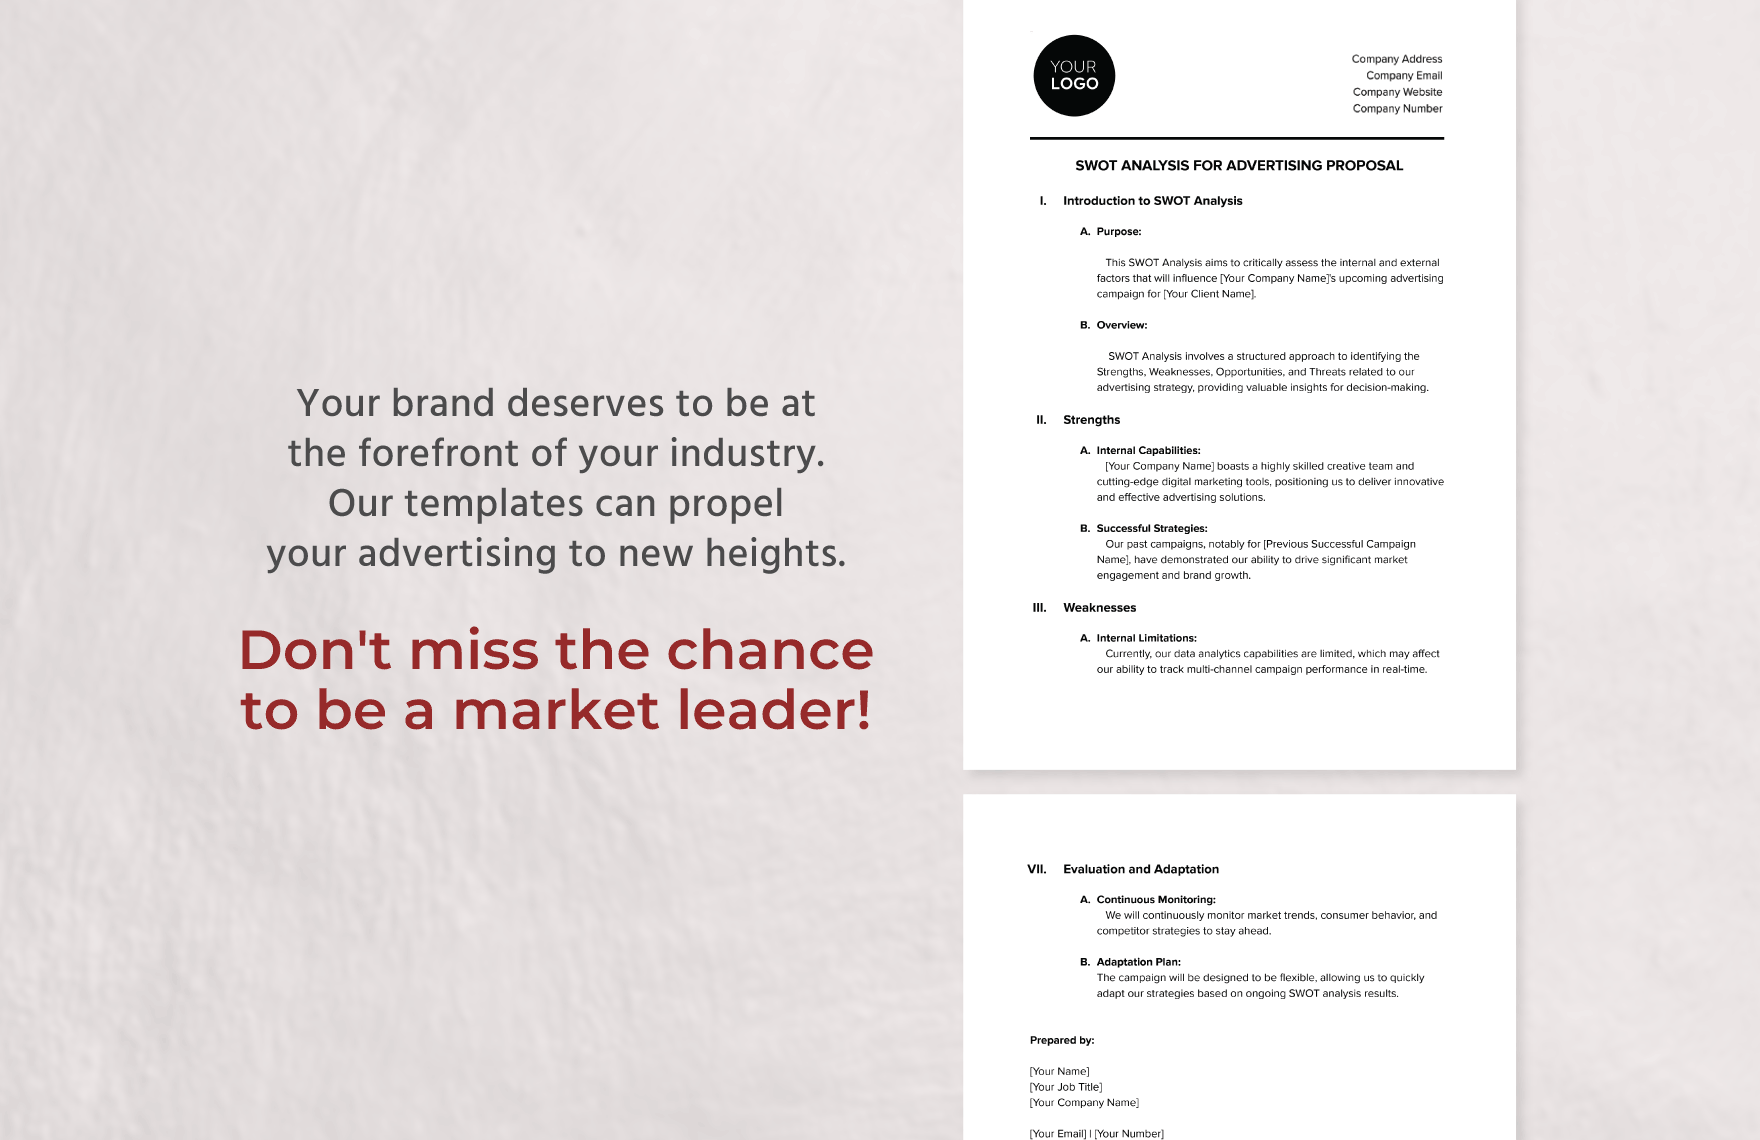 SWOT Analysis for Advertising Proposal Template